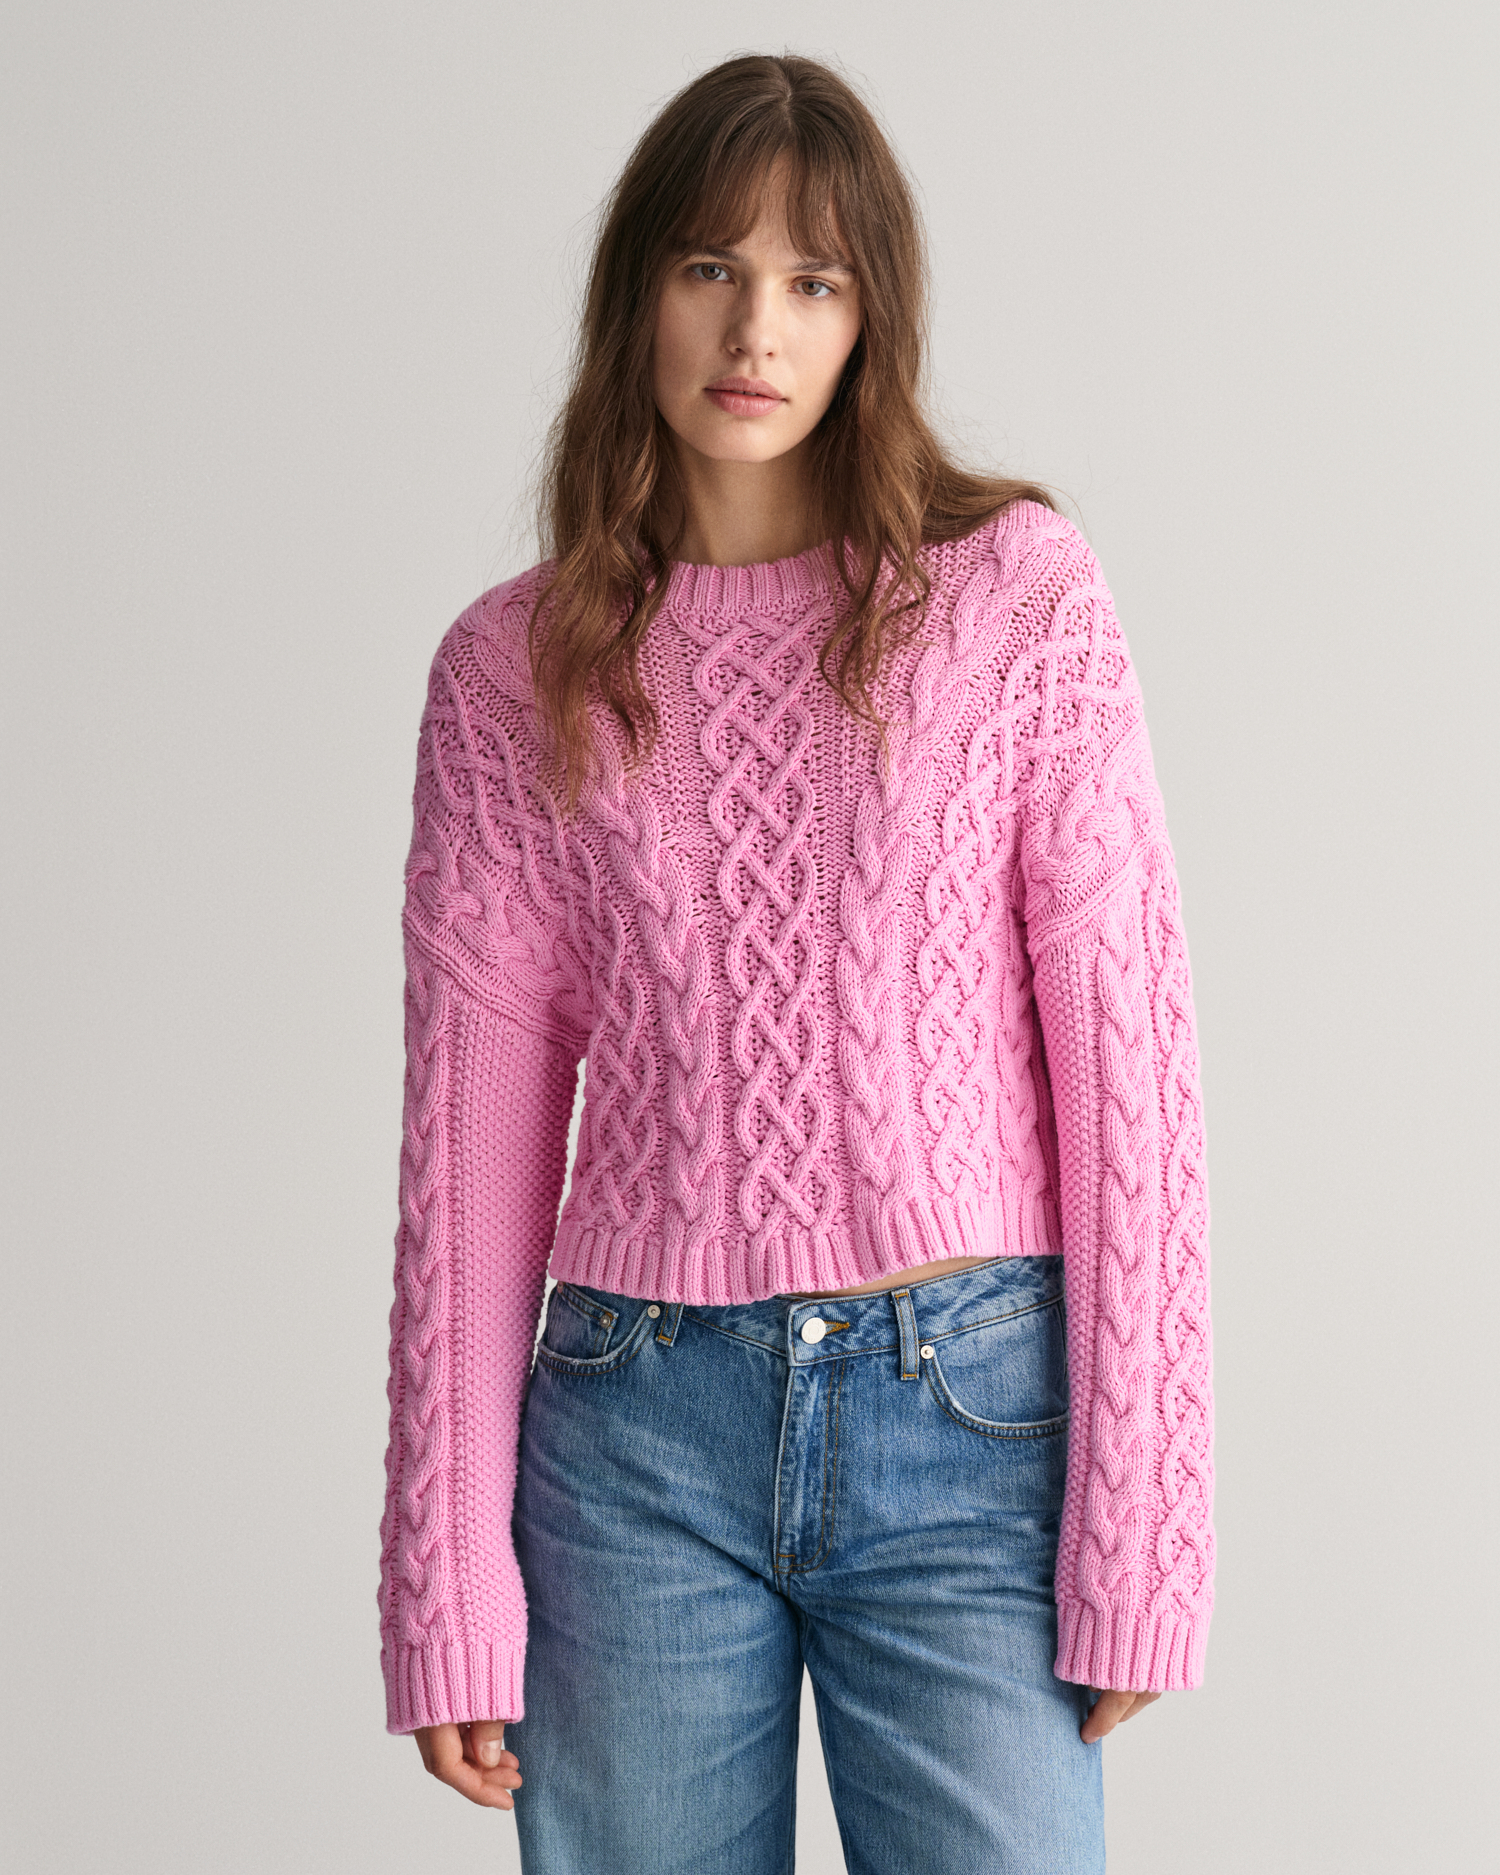 Cable Knit Crew Neck Sweater